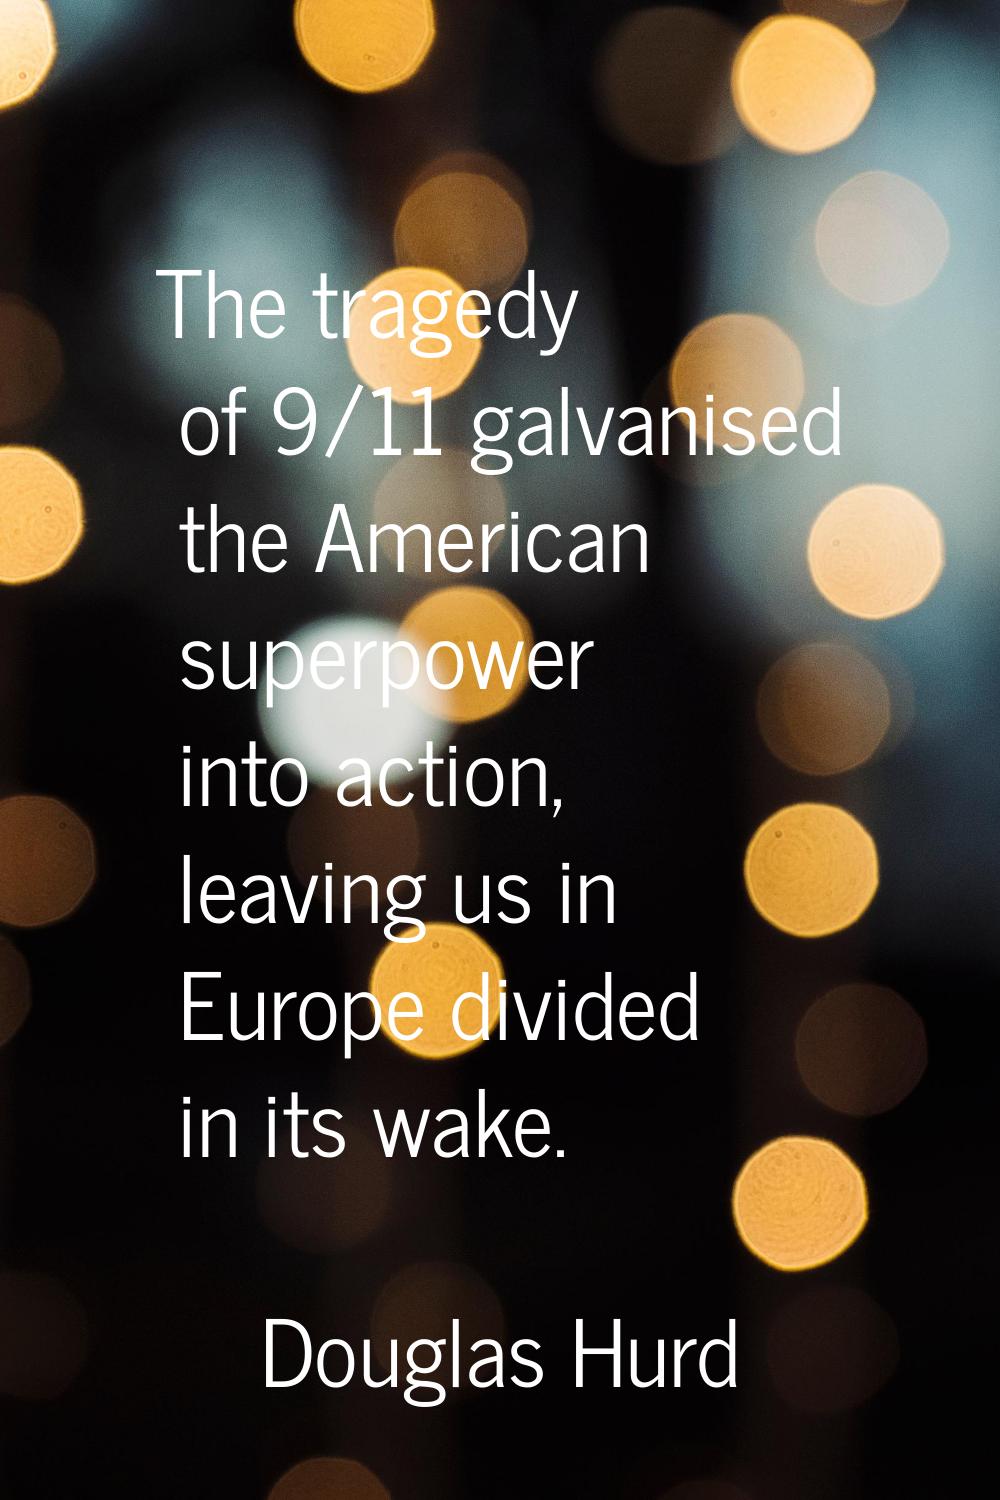 The tragedy of 9/11 galvanised the American superpower into action, leaving us in Europe divided in